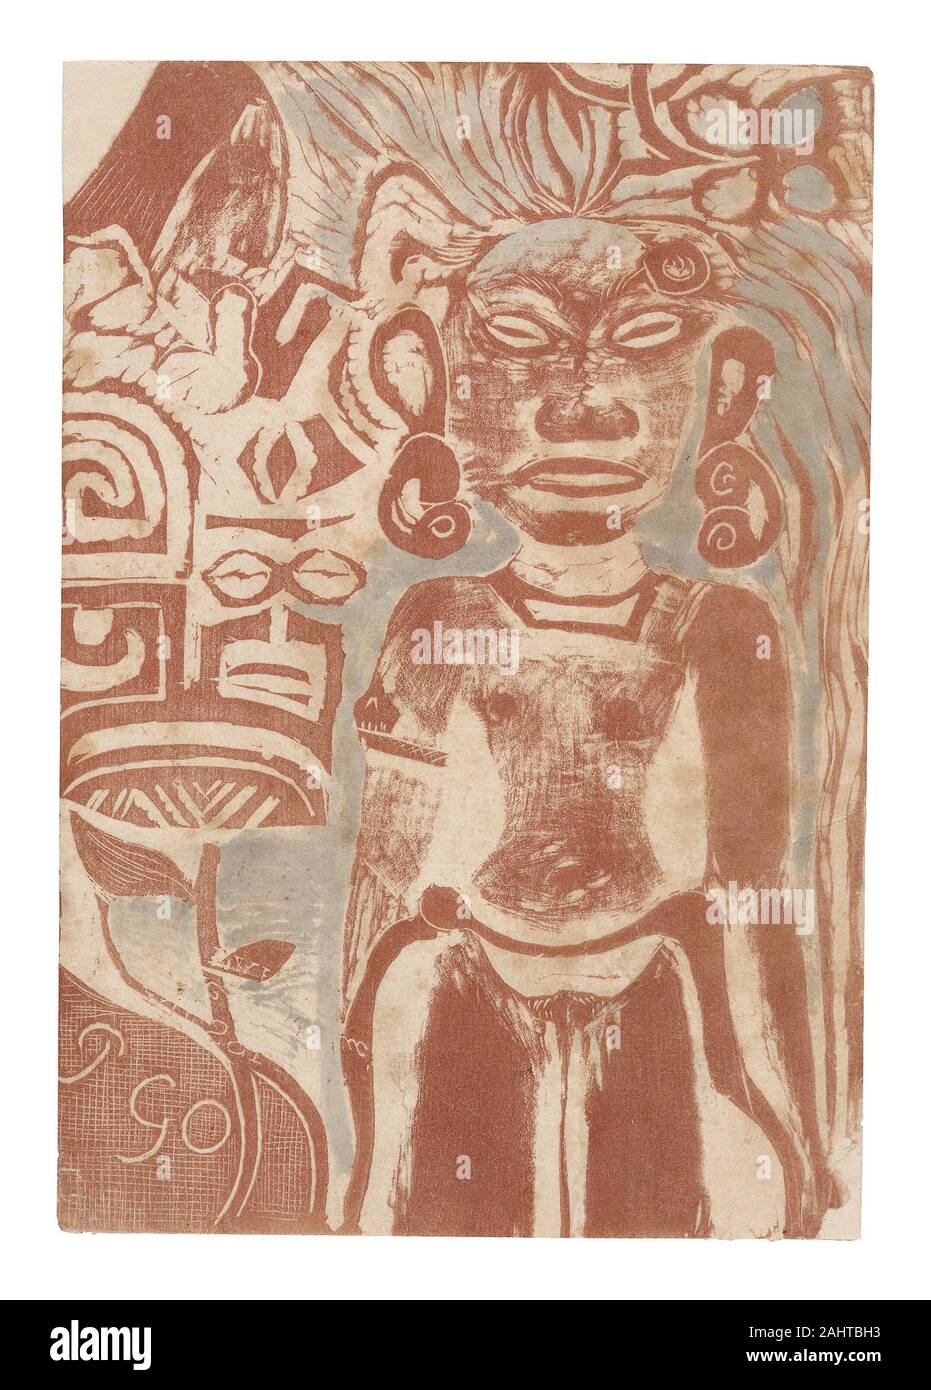 Paul Gauguin. Tahitian Idol—the Goddess Hina. 1894–1895. France. Wood-block print in reddish-brown ink with blue-gray watercolor on ivory wove paper, laid down on ivory wove paper Stock Photo